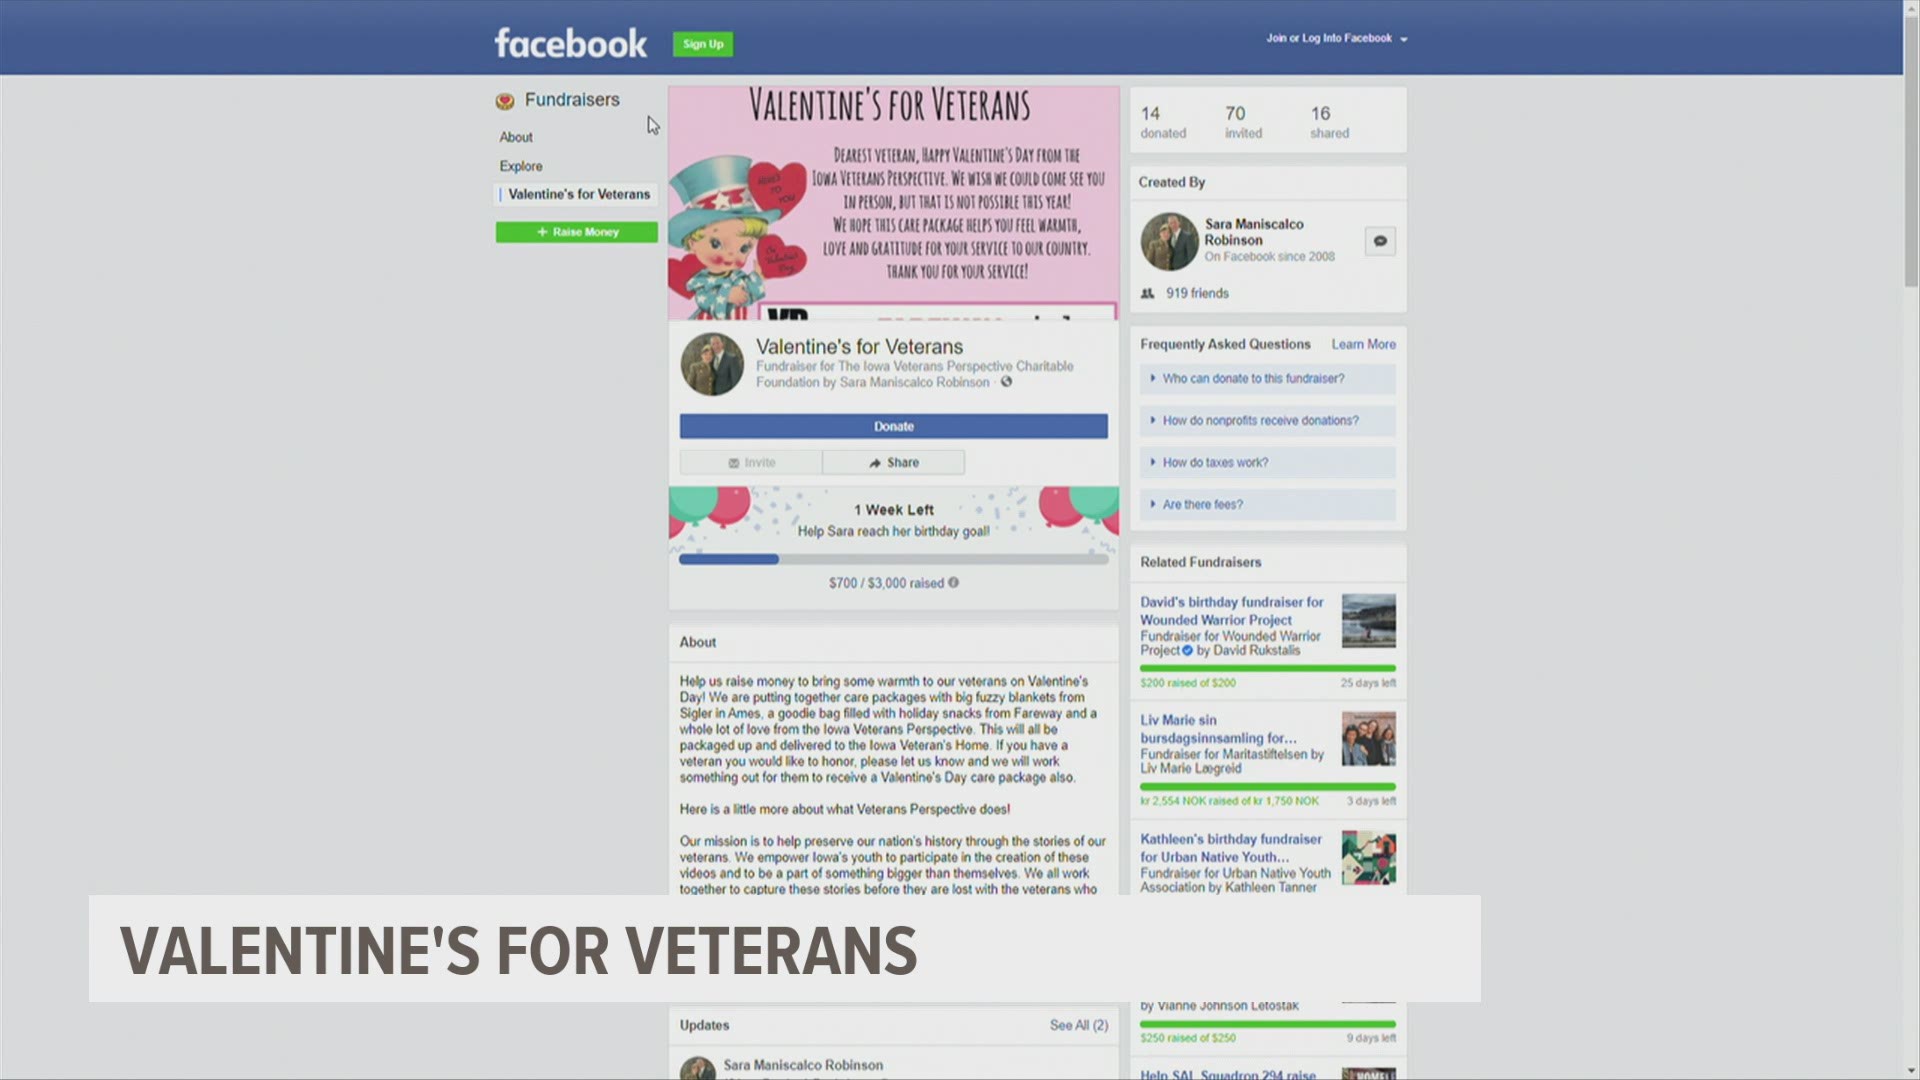 Iowa Veterans' Perspective is hosting a Facebook fundraiser to give Valentines to Veterans